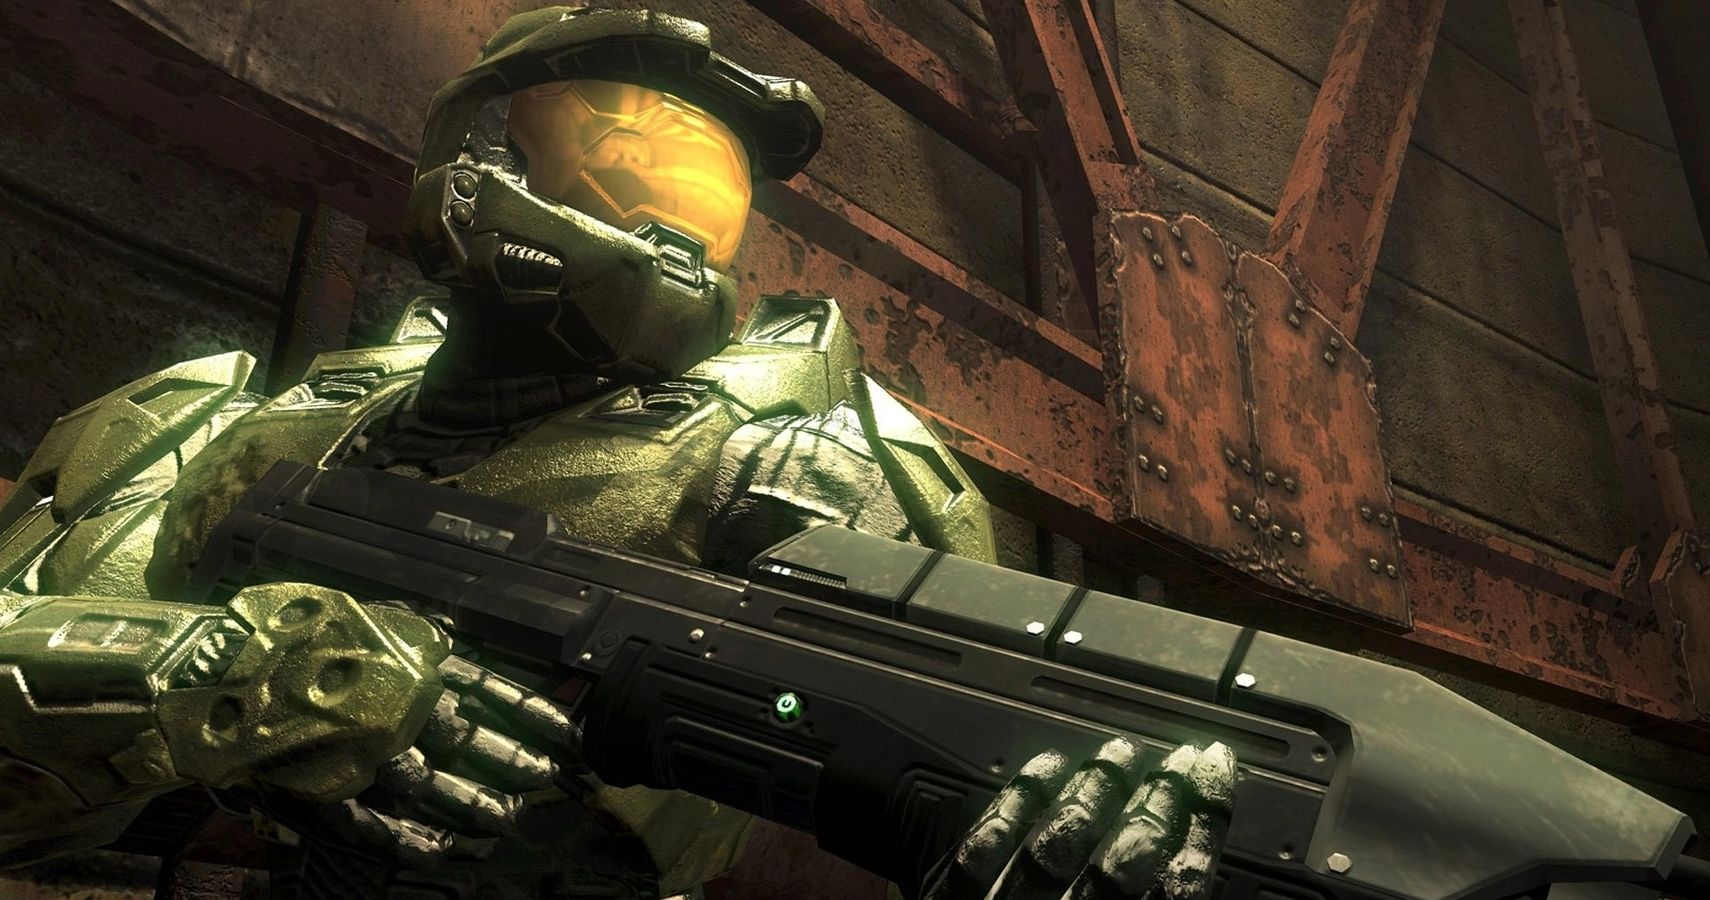 Check Out These New Screenshots From The Set Of The Halo TV Series